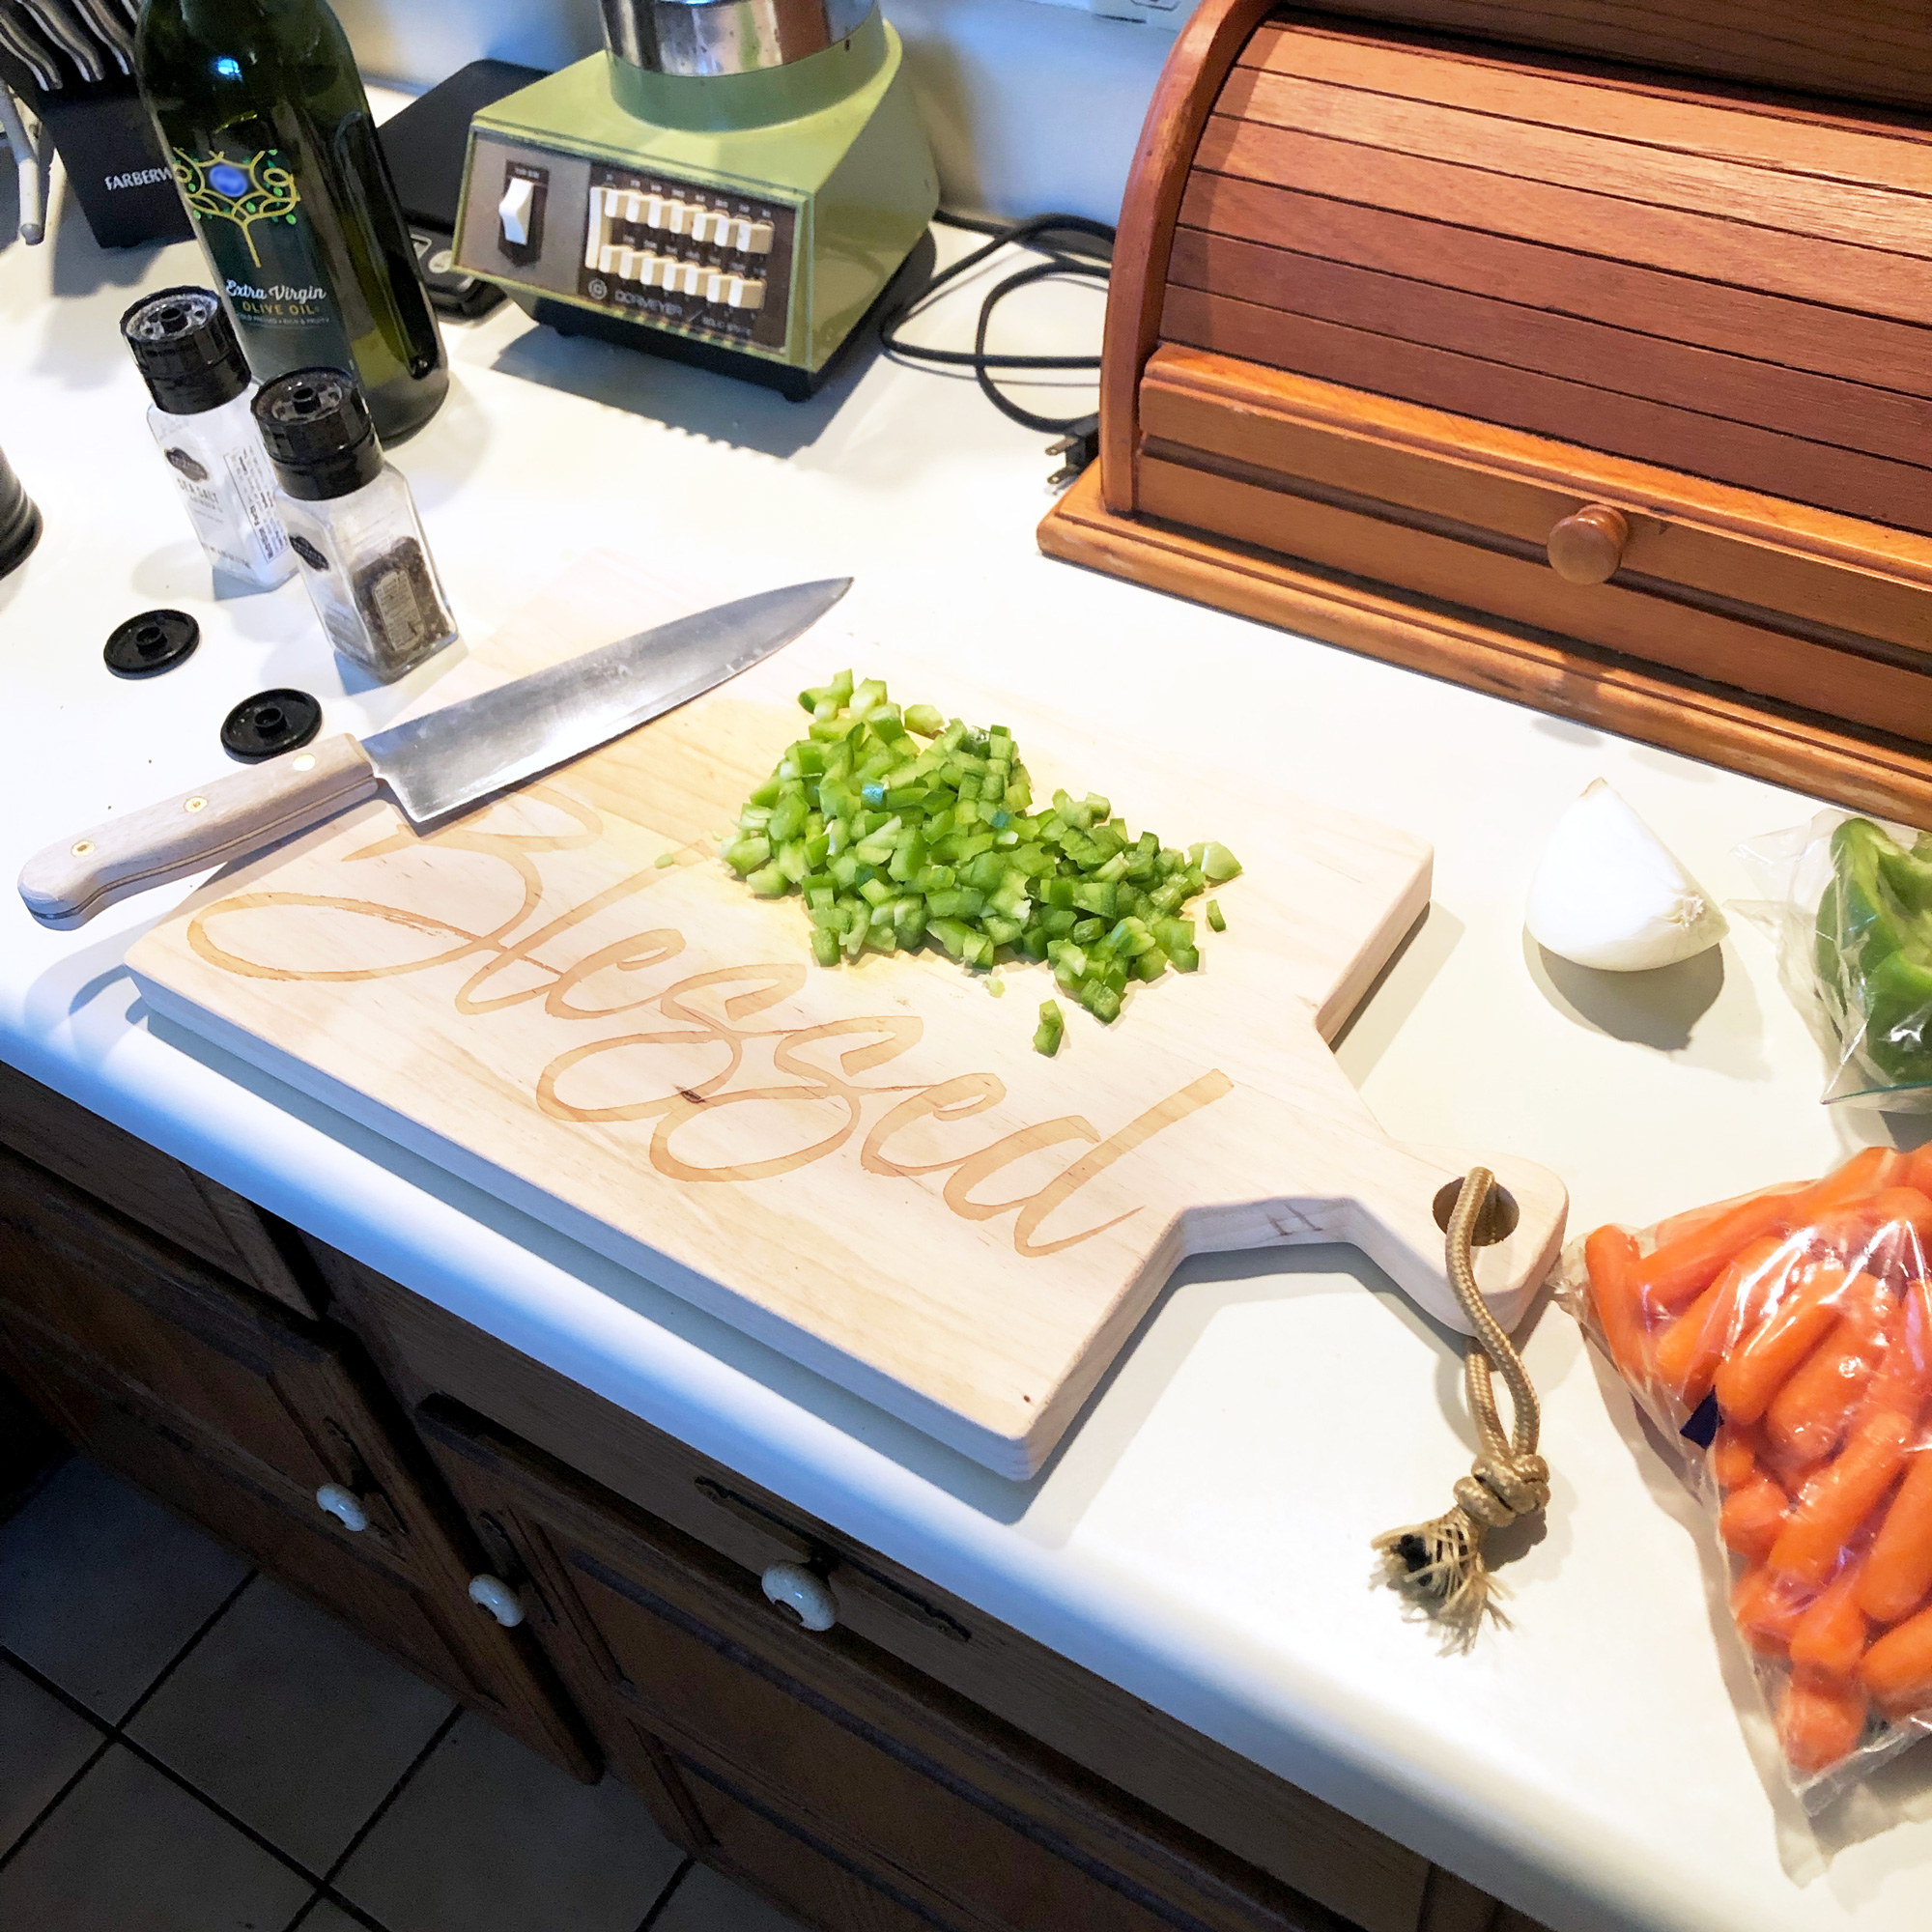 Blessed Cutting Board, a Knife and Chopped Vegetables